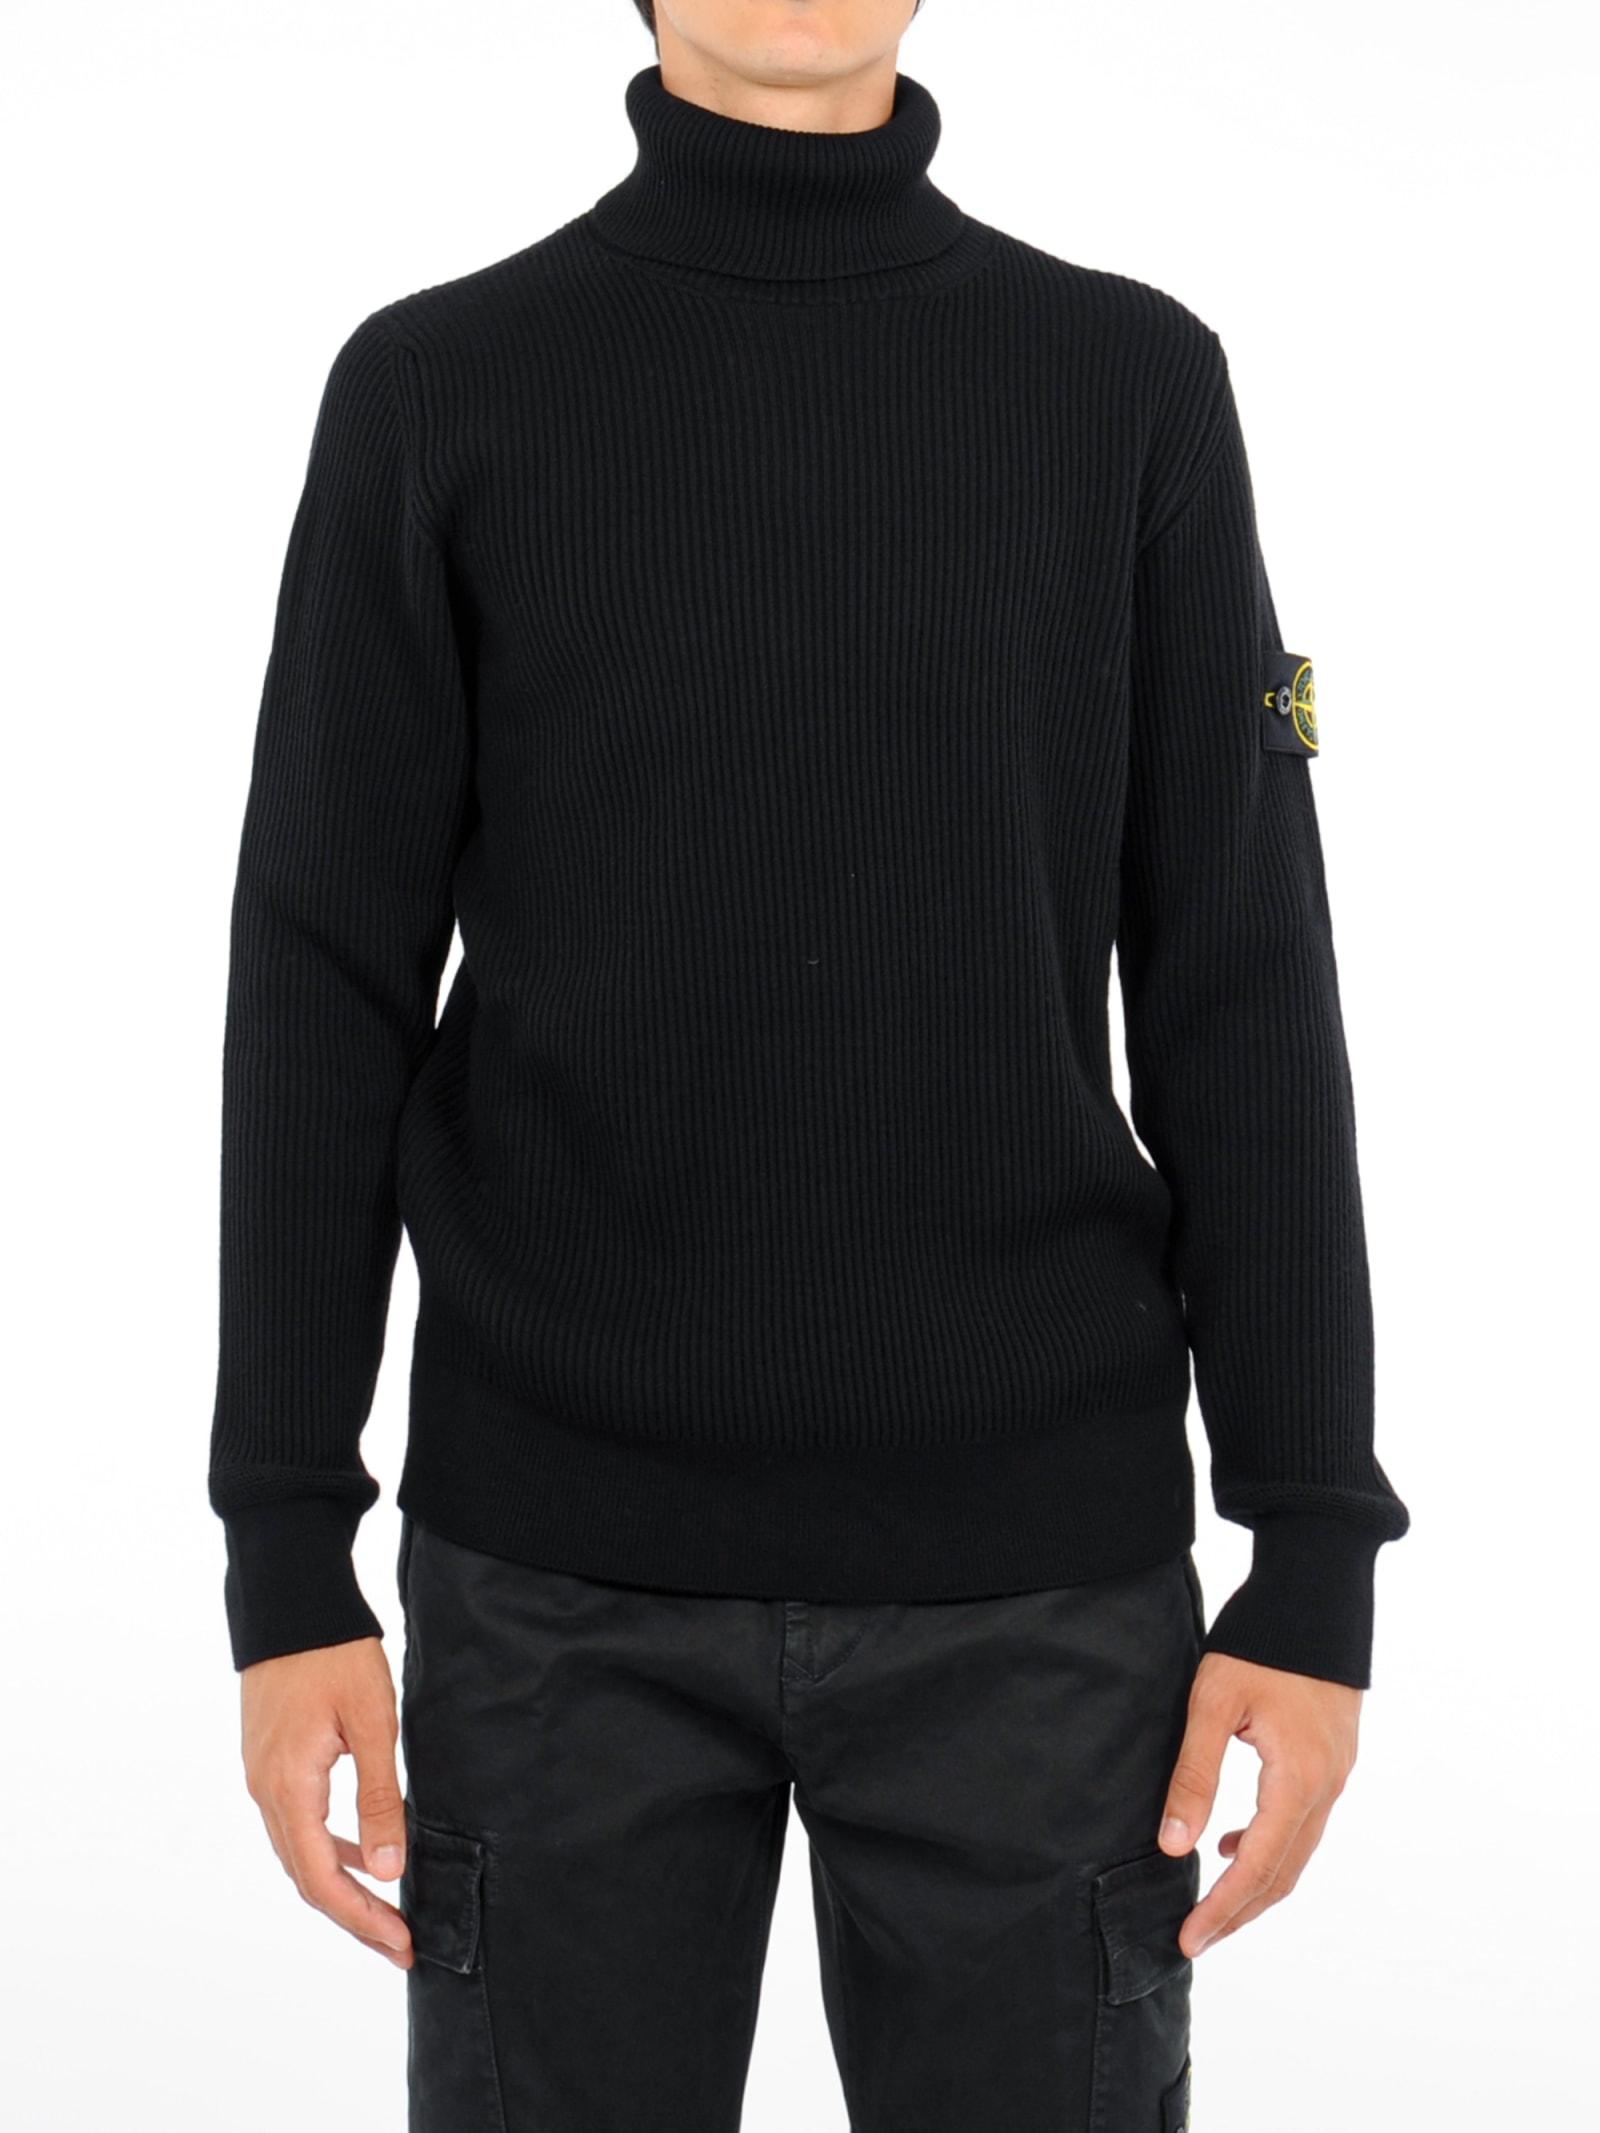 Stone Island Turtle Neck Knit Sweater in Nero (Black) for Men - Save 35% |  Lyst